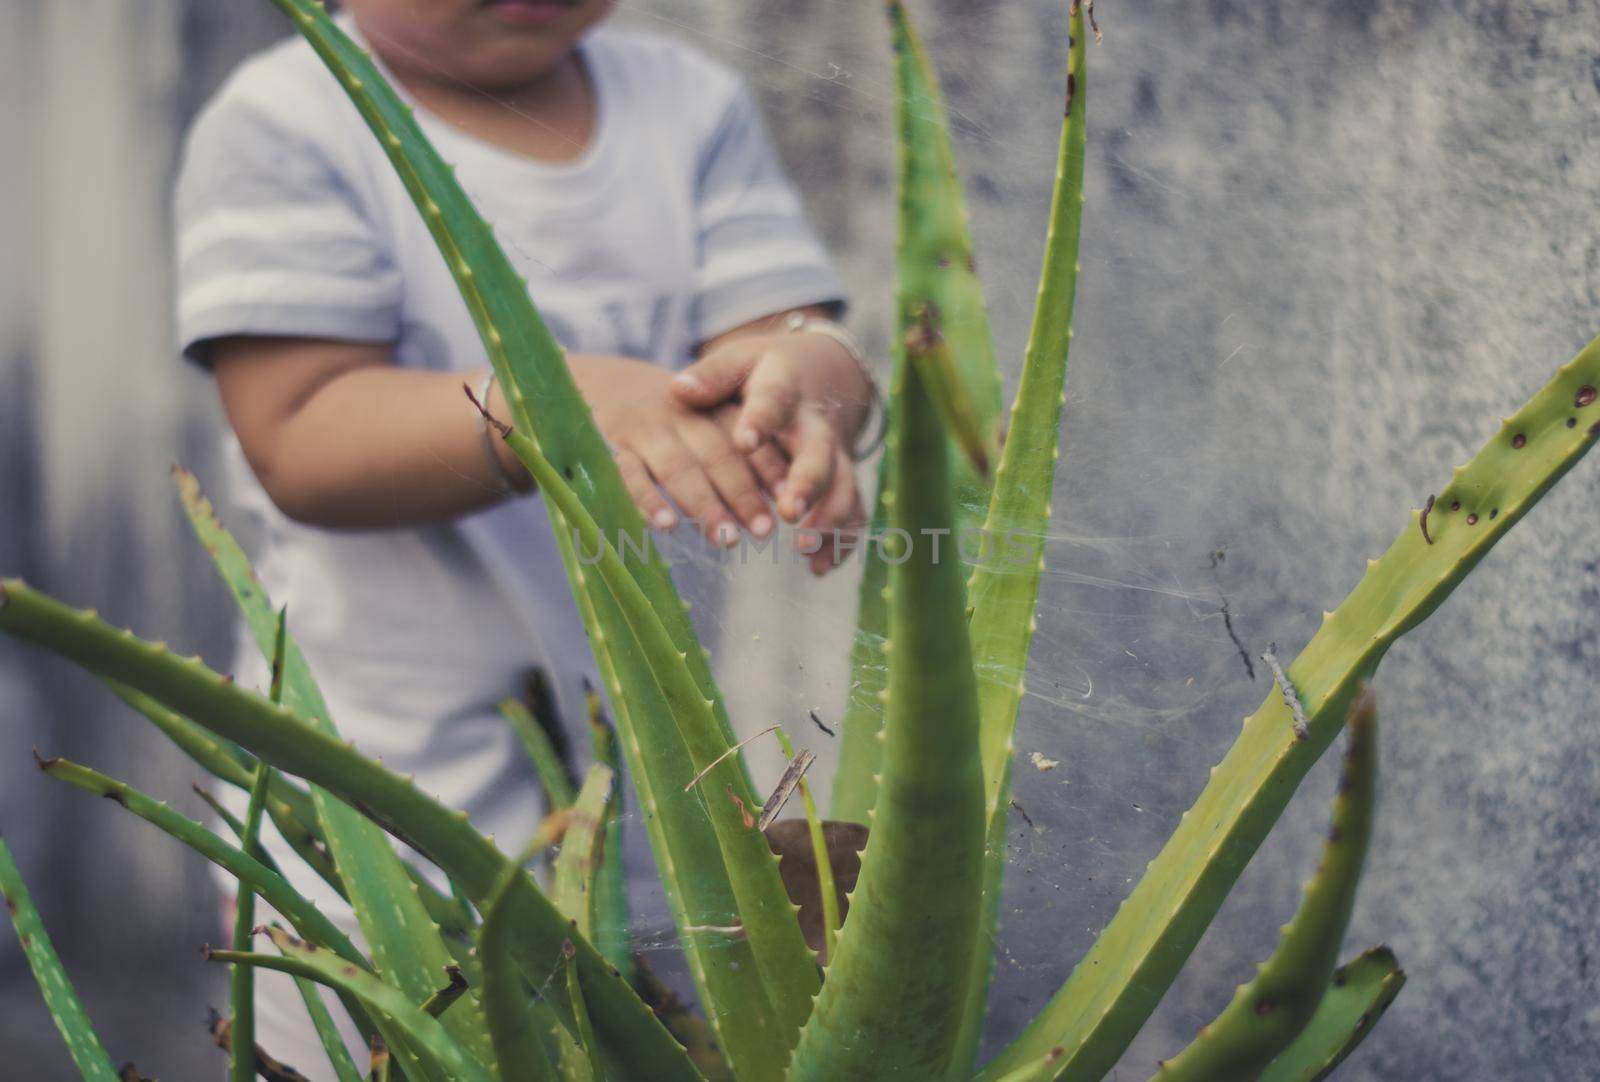 Close up of poisonous thorny plant leaves against baby hand in the background.